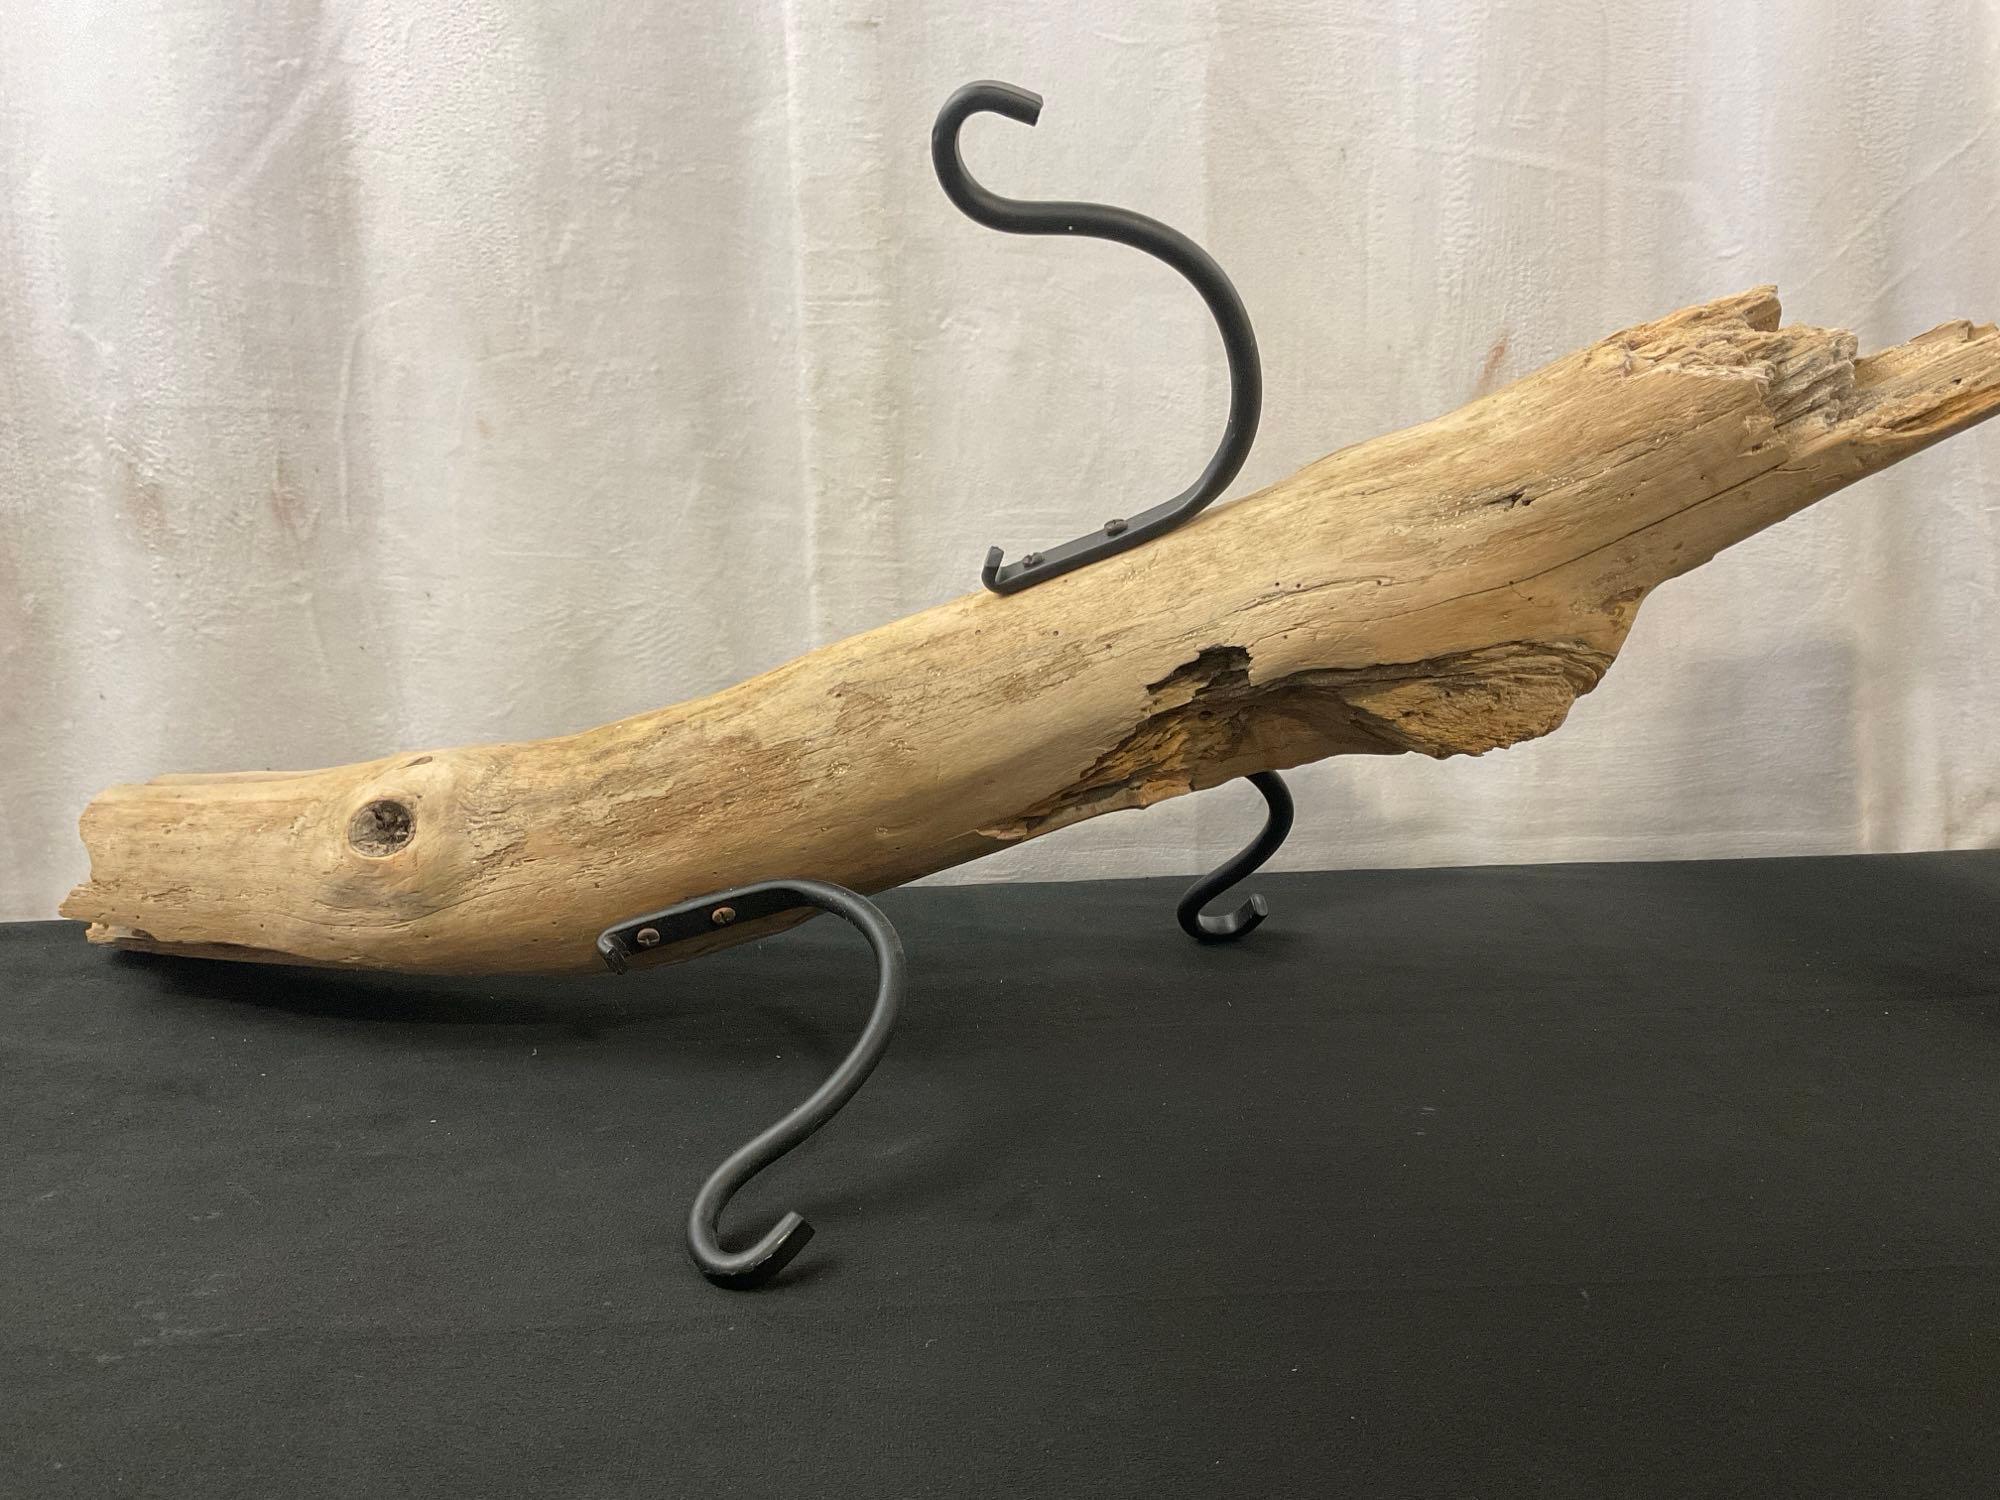 Driftwood Hanging Log, and Rust colored Willow Tree Star Figure